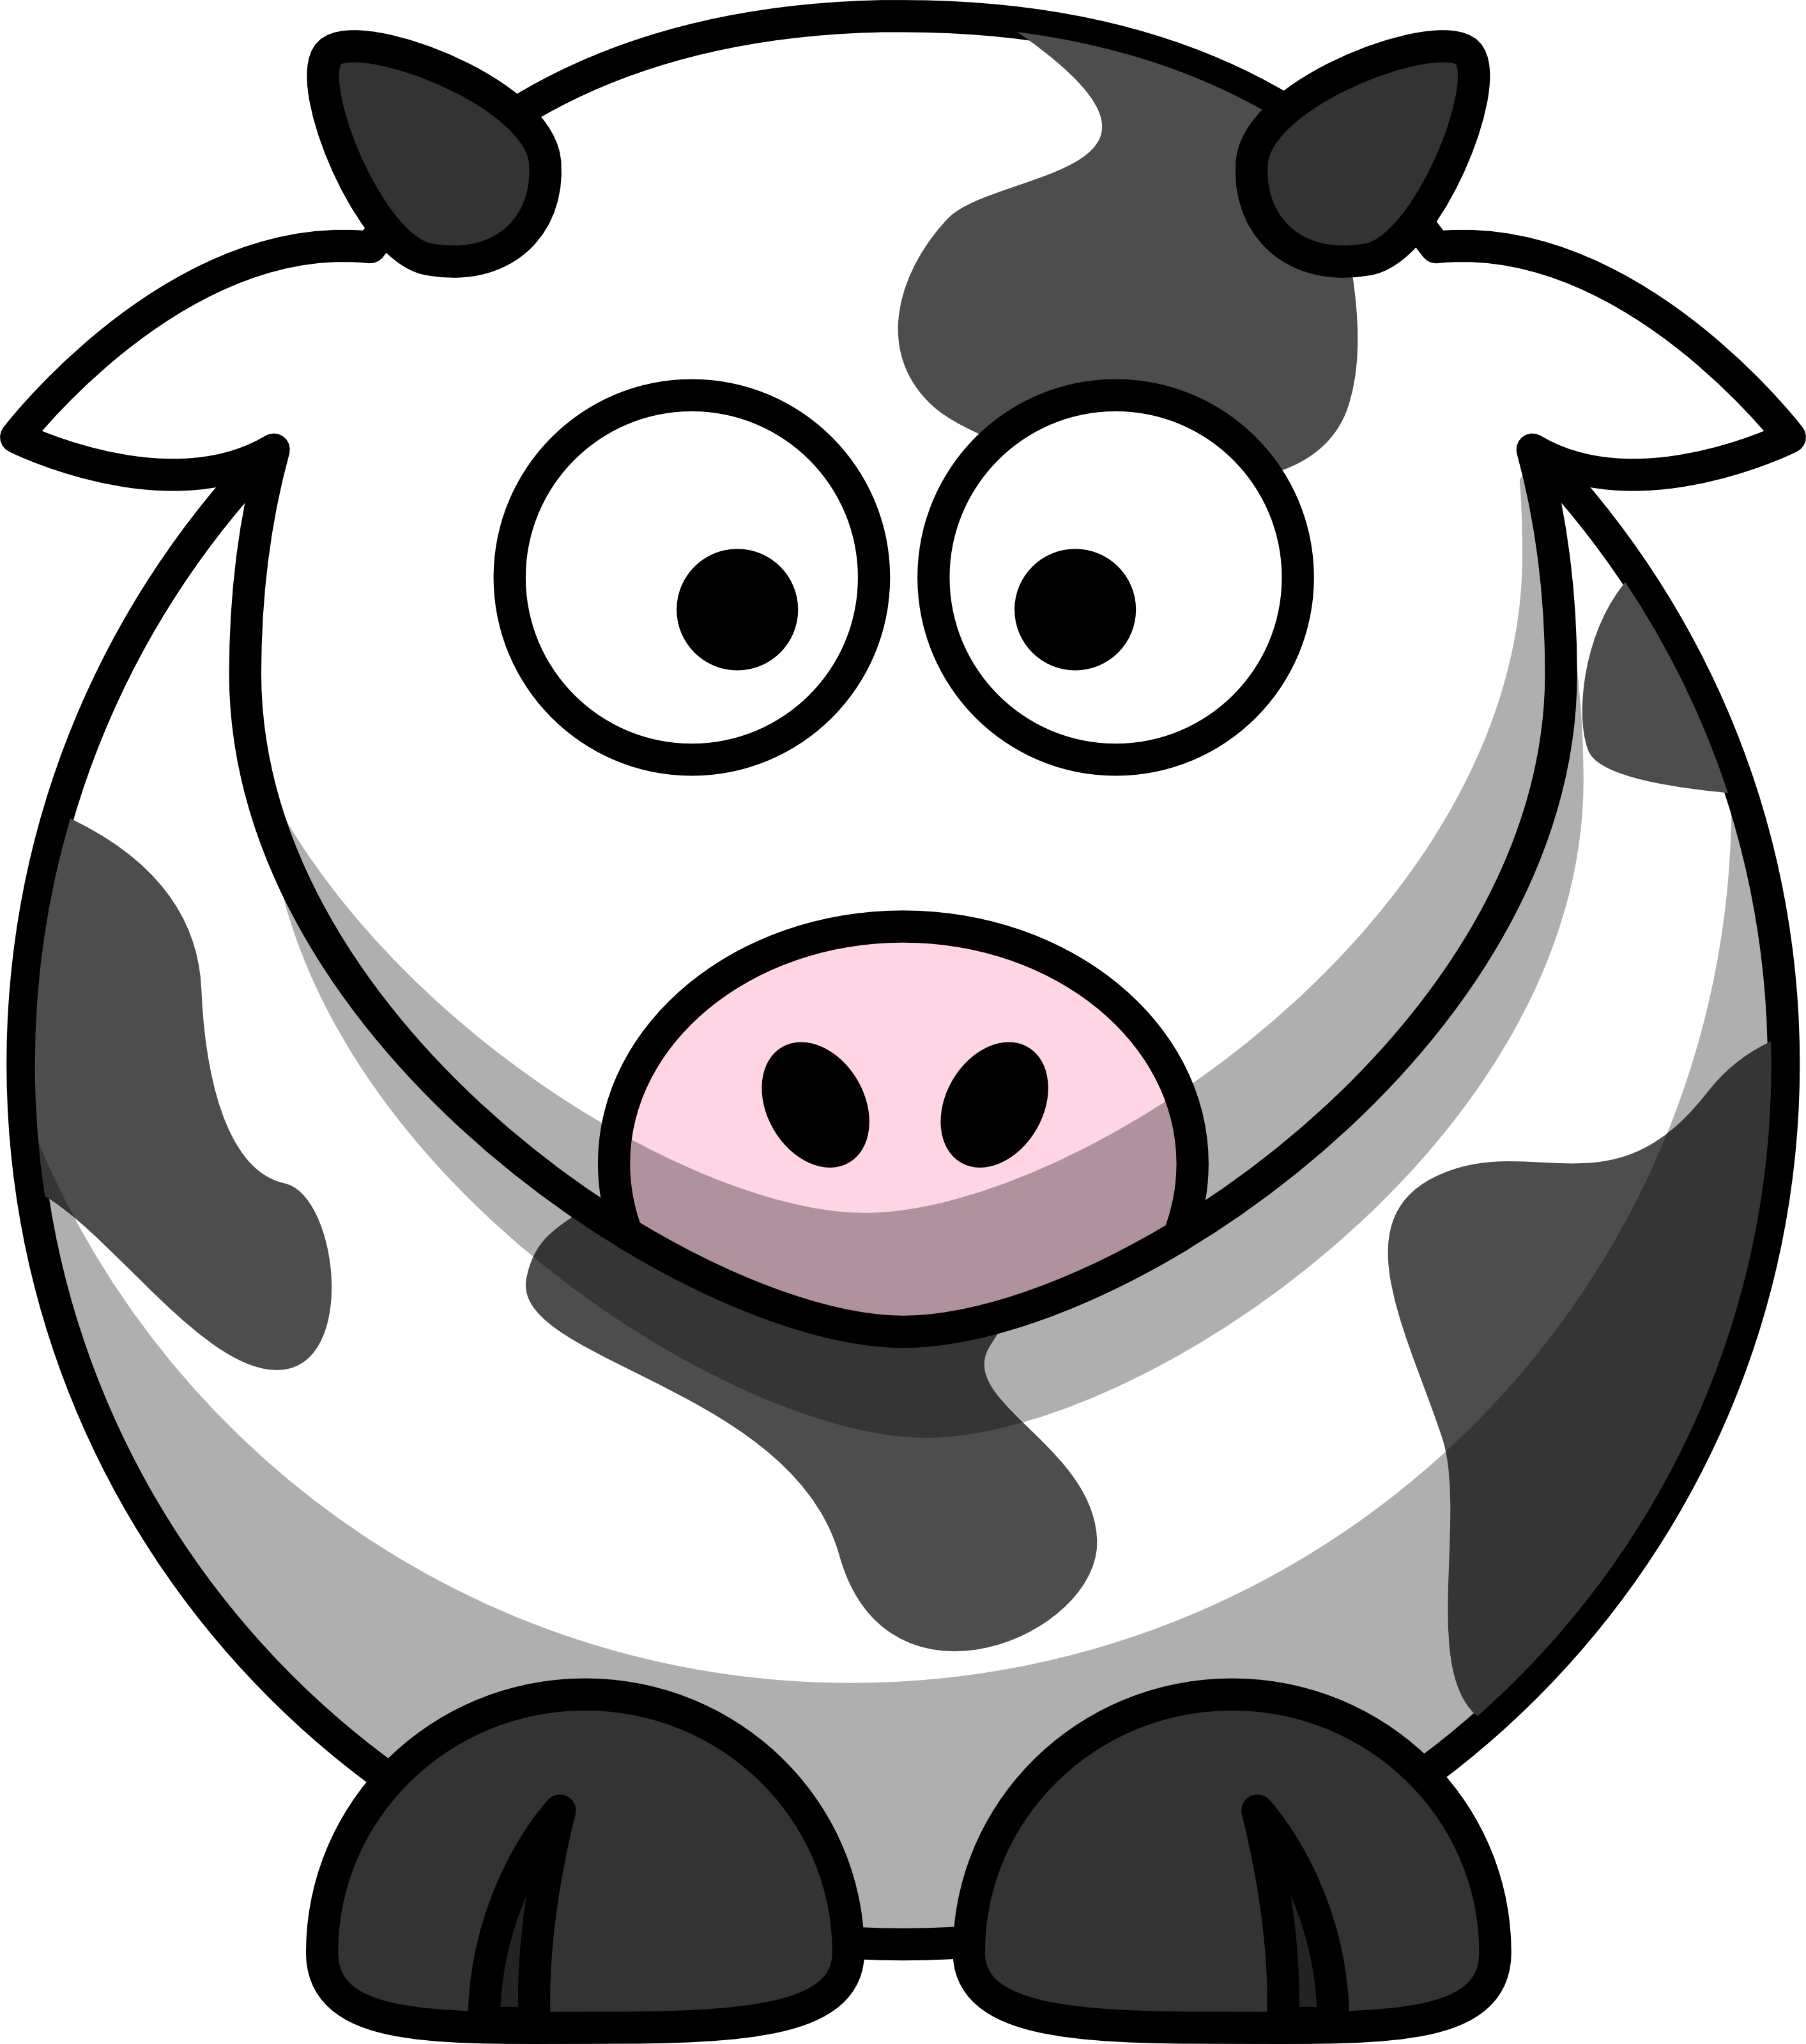 change every button on /r/crazyideas into a picture of a cow ...